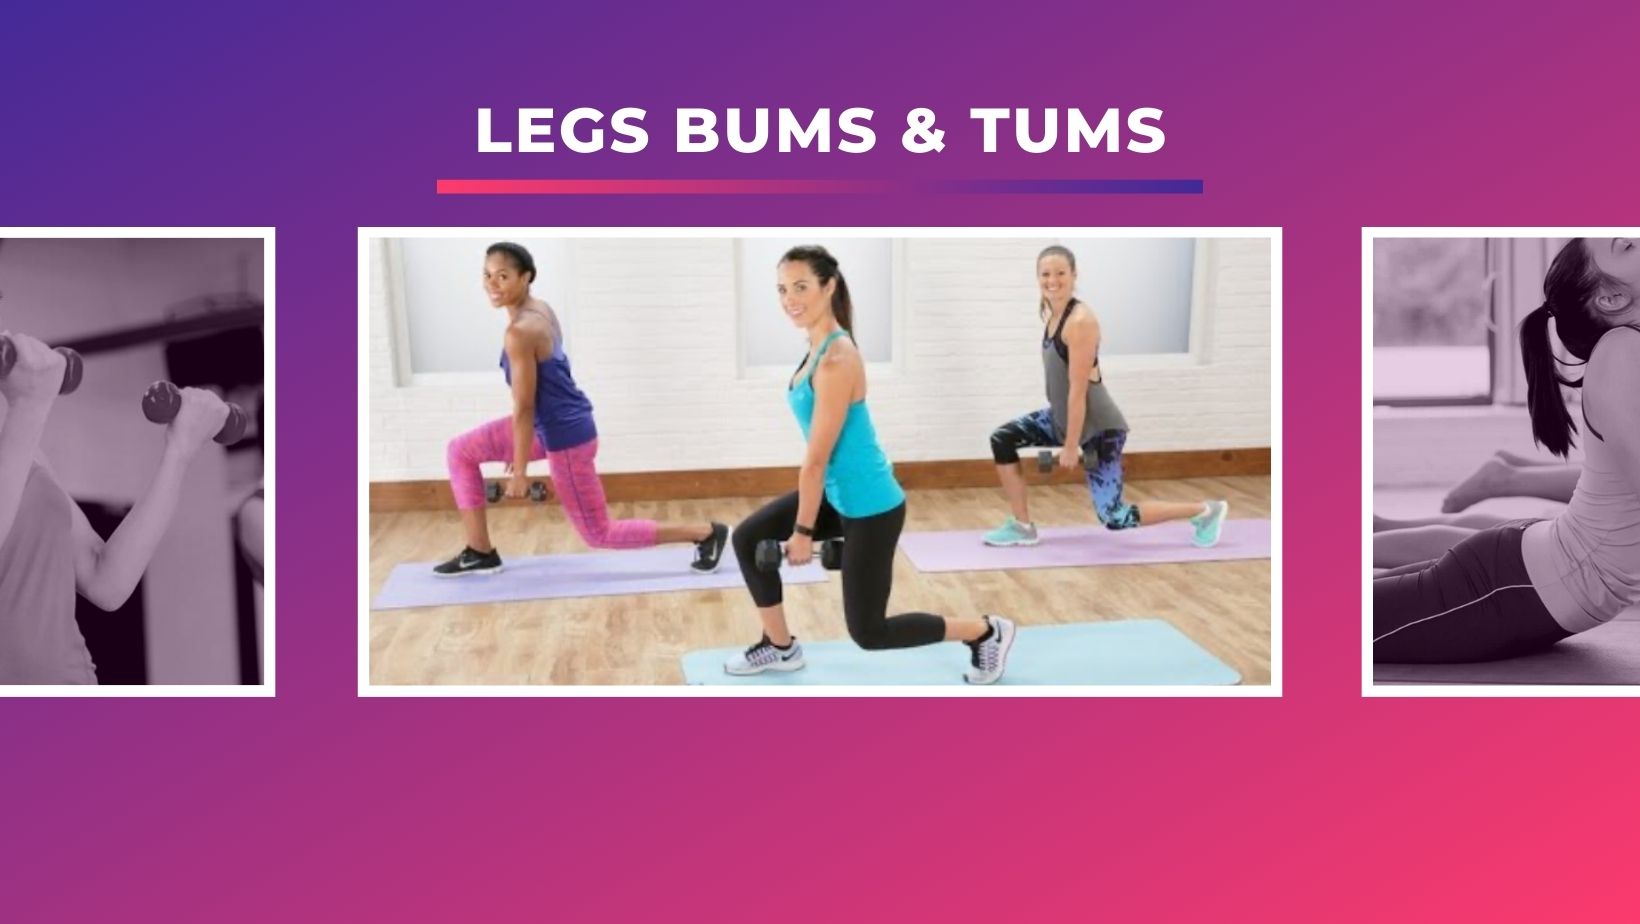 https://www.keepfitwithmichelle.co.uk/images/LEGS_BUMS_TUMS.jpg